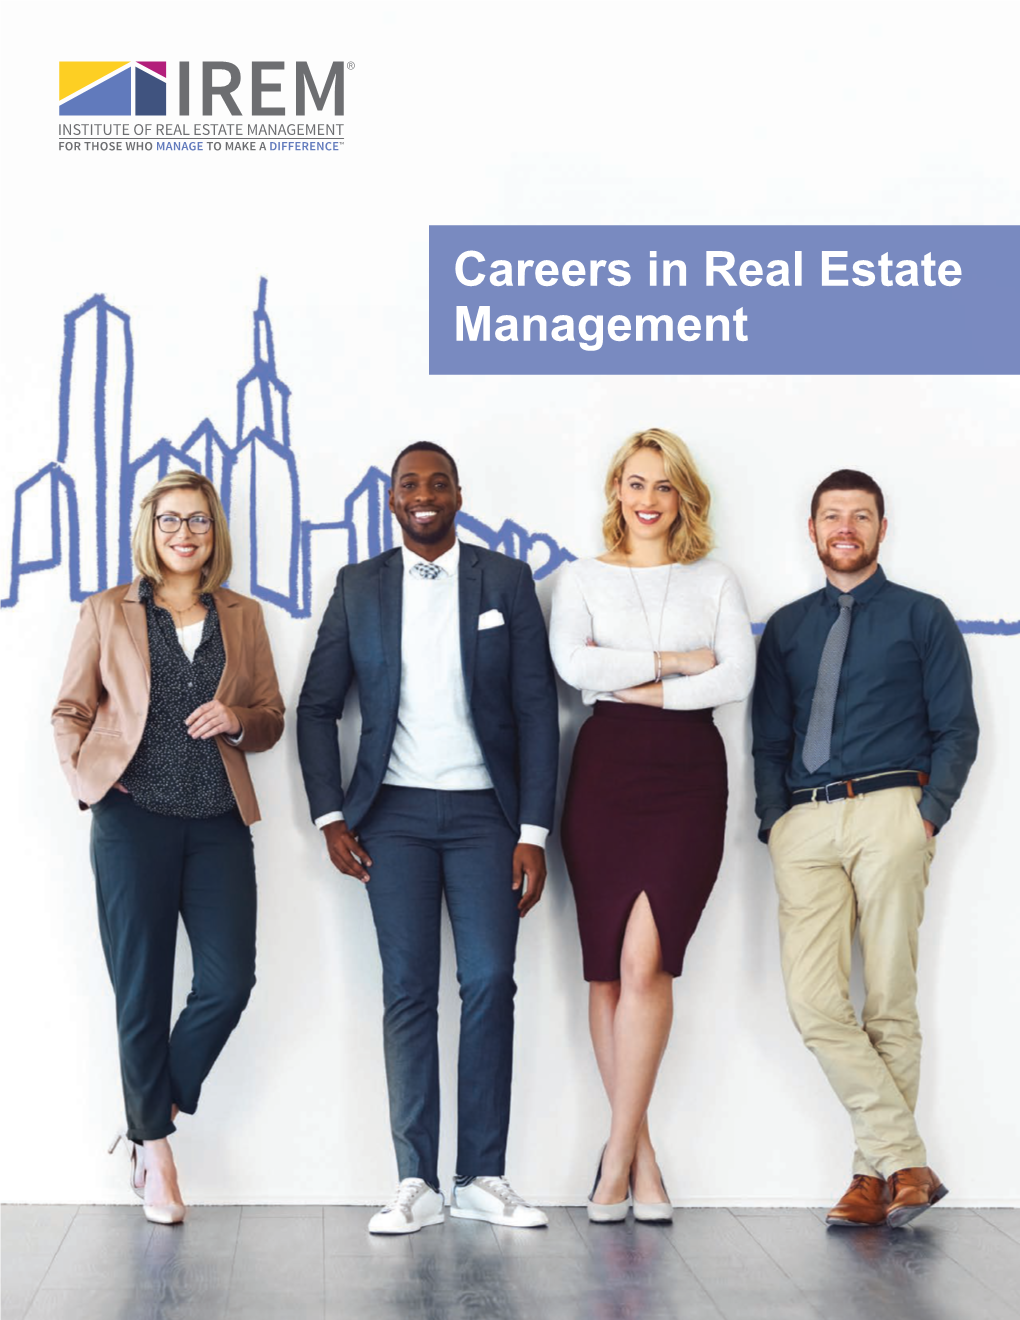 Is a Career in Real Estate Management in Your Future?